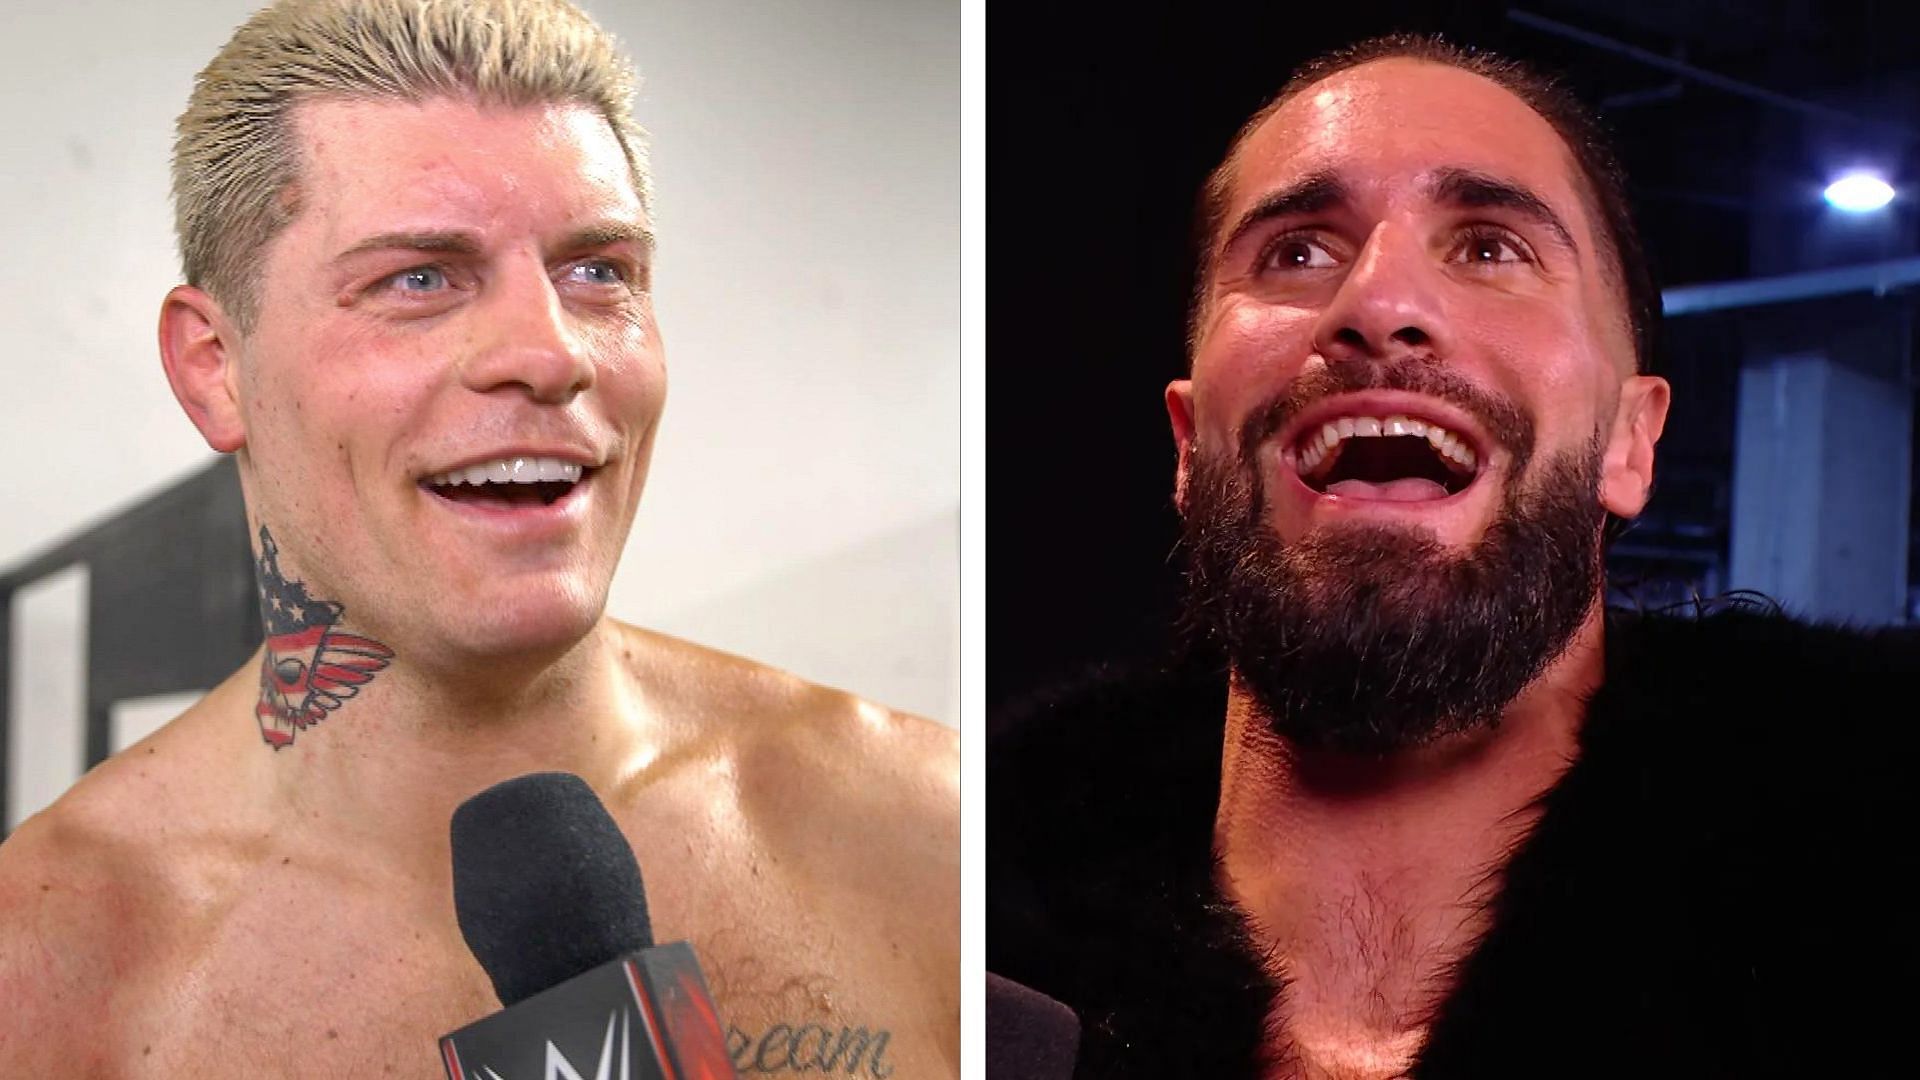 Cody Rhodes and Seth Rollins could have another match in WWE